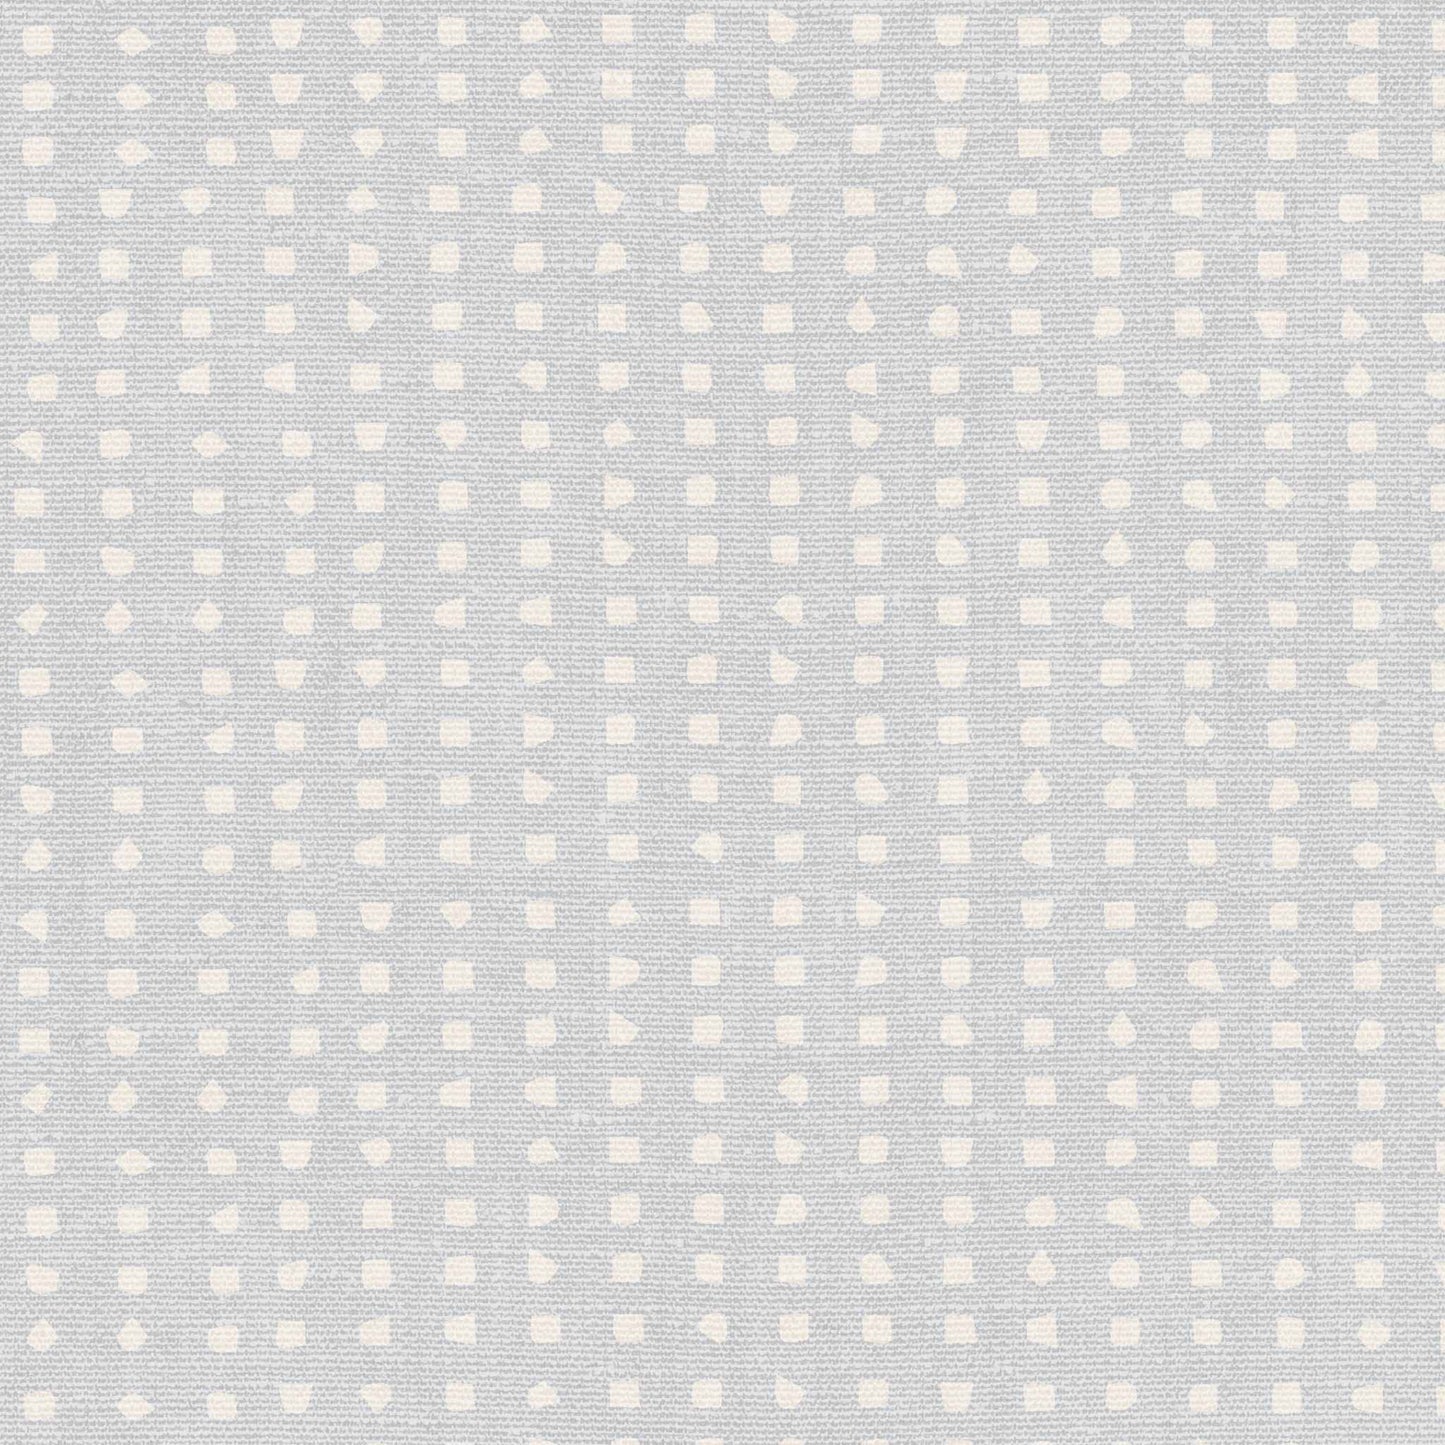 Inspire a creative atmosphere with our Geometric Dots Wallpaper in pale blue. Its abstract pattern of dots will bring any room to life, allowing you to express sophistication with a unique and artistic approach. 